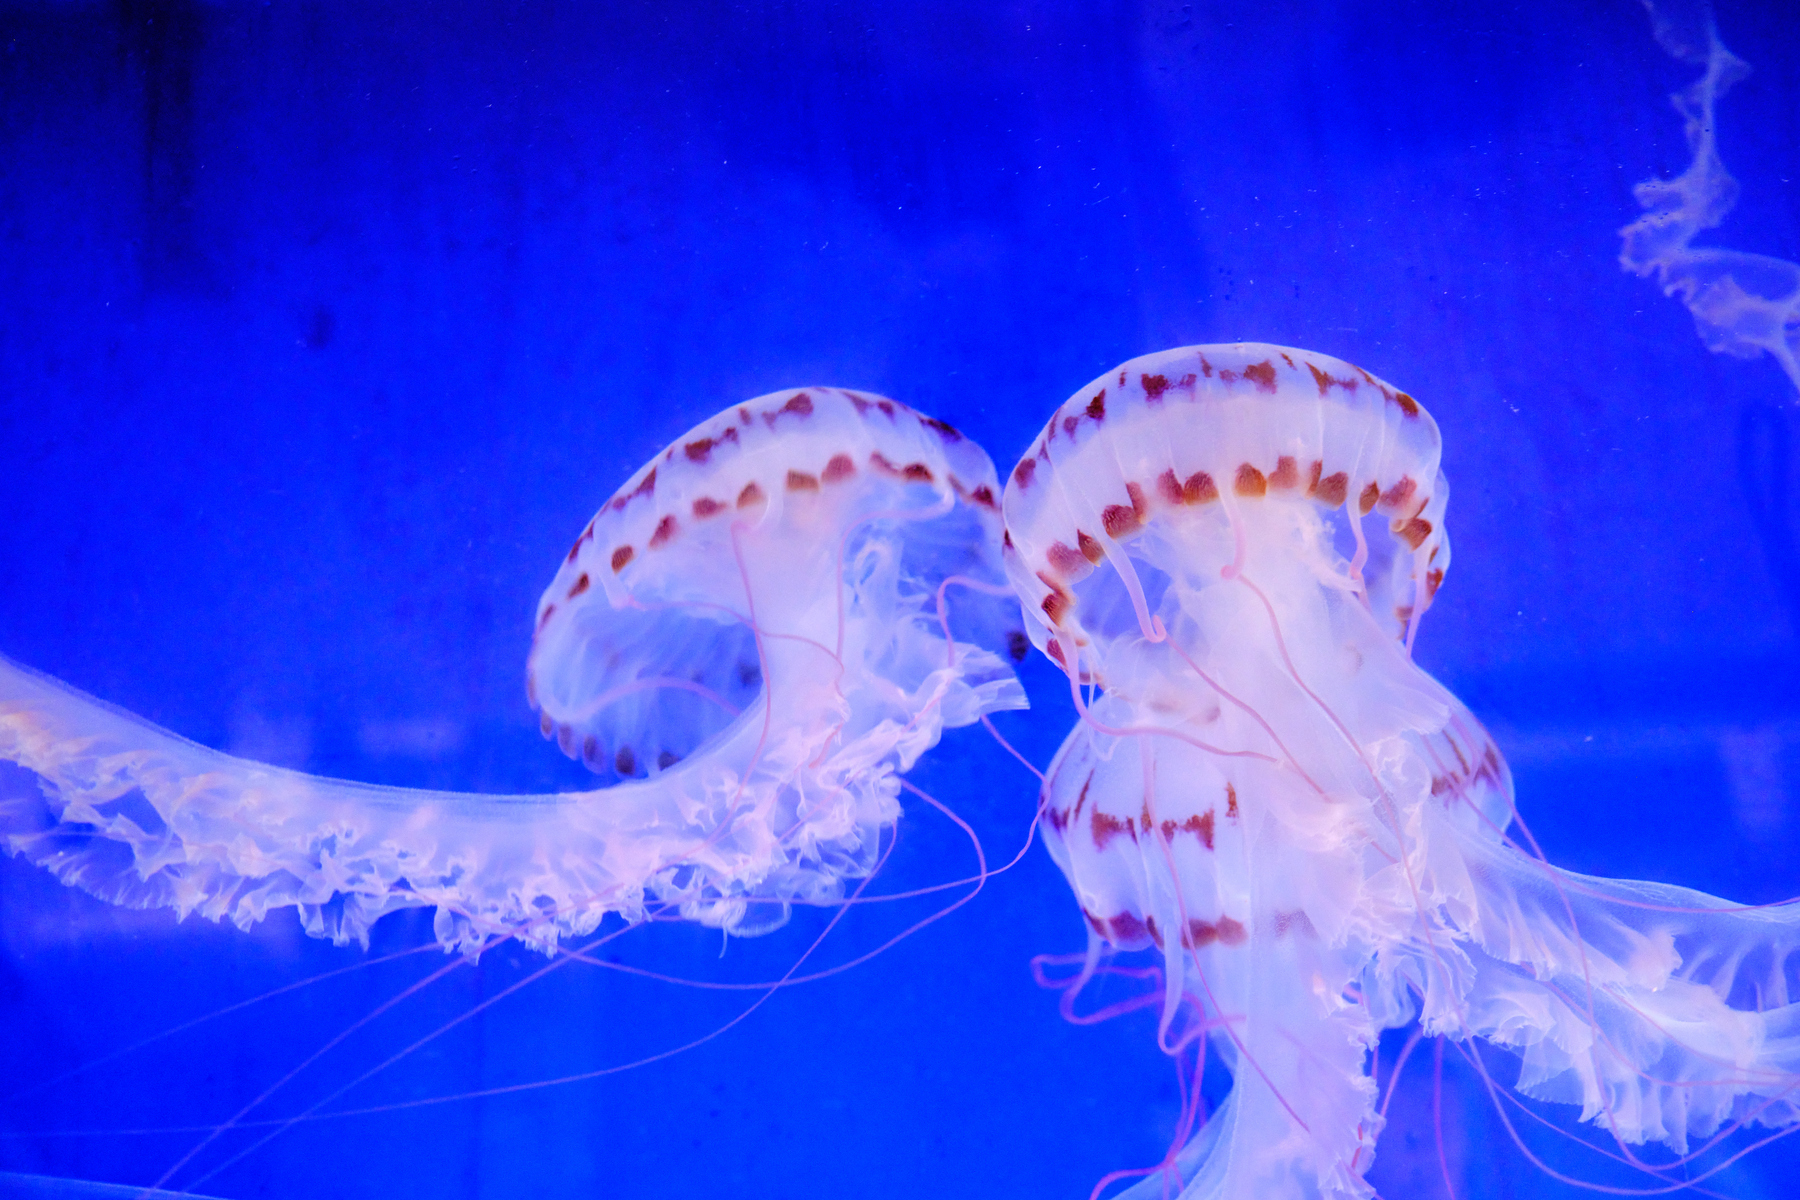 Against the dark blue background of the tank, three purple-striped jellyfish drift towards each other in the middle of the frame while their tentacles stretch out towards the sides. 